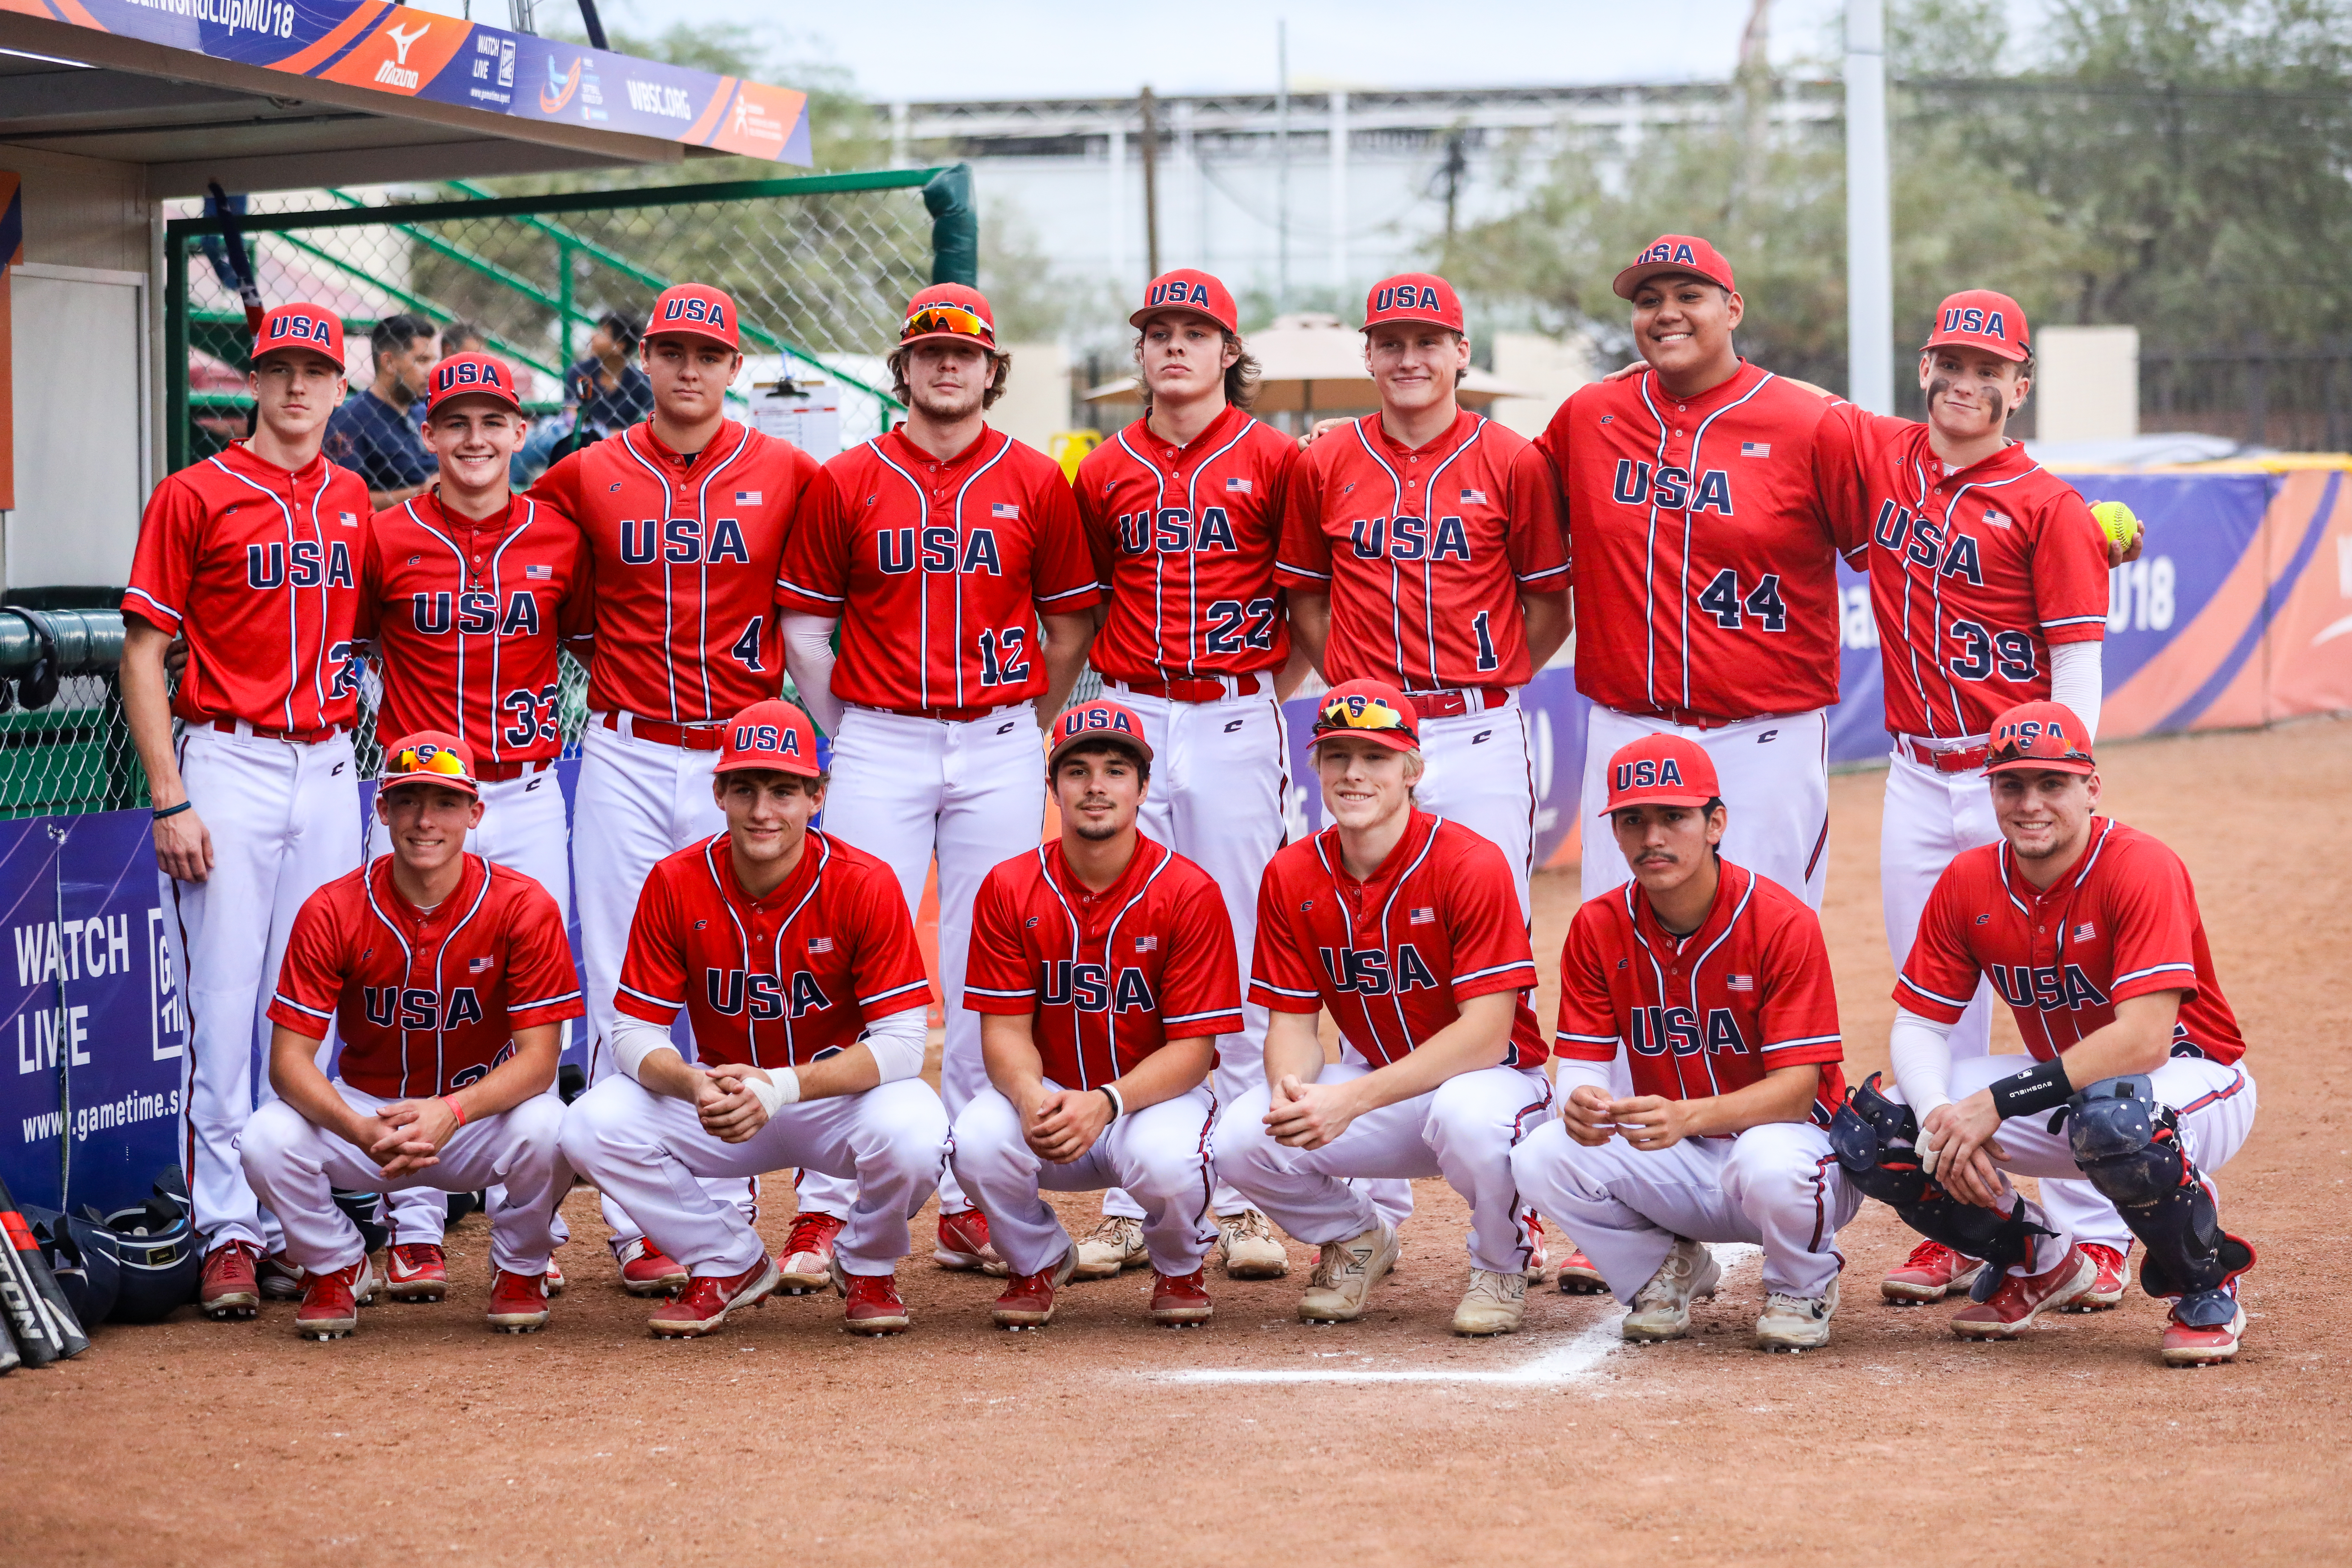 A late comeback for Canada results in a narrow 2-1 loss for Team USA; Eagles finish the WBSC U-18 Men’s World Cup in 4th place featured image